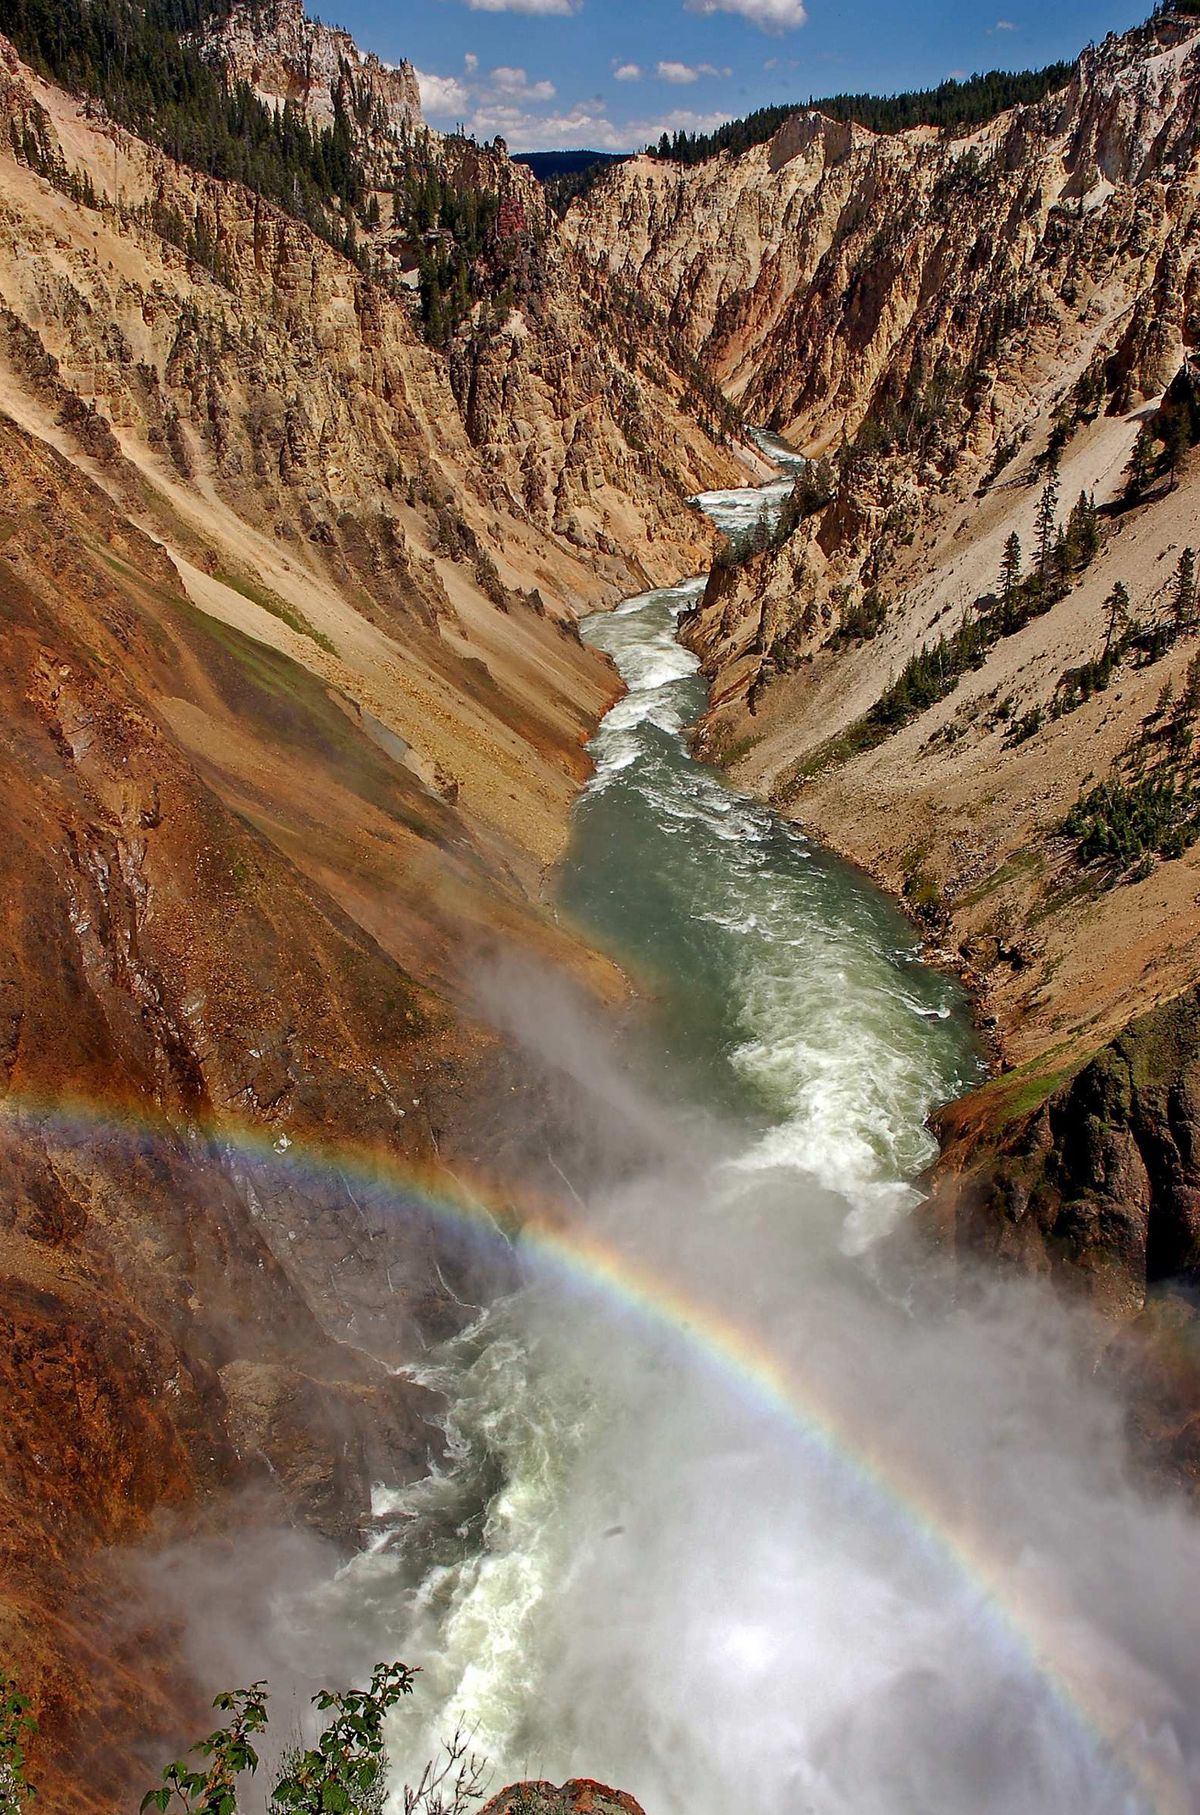 A rainbow arcs over the canyon at the Lower Falls of the Yellowstone River in Yellowstone National Park. 